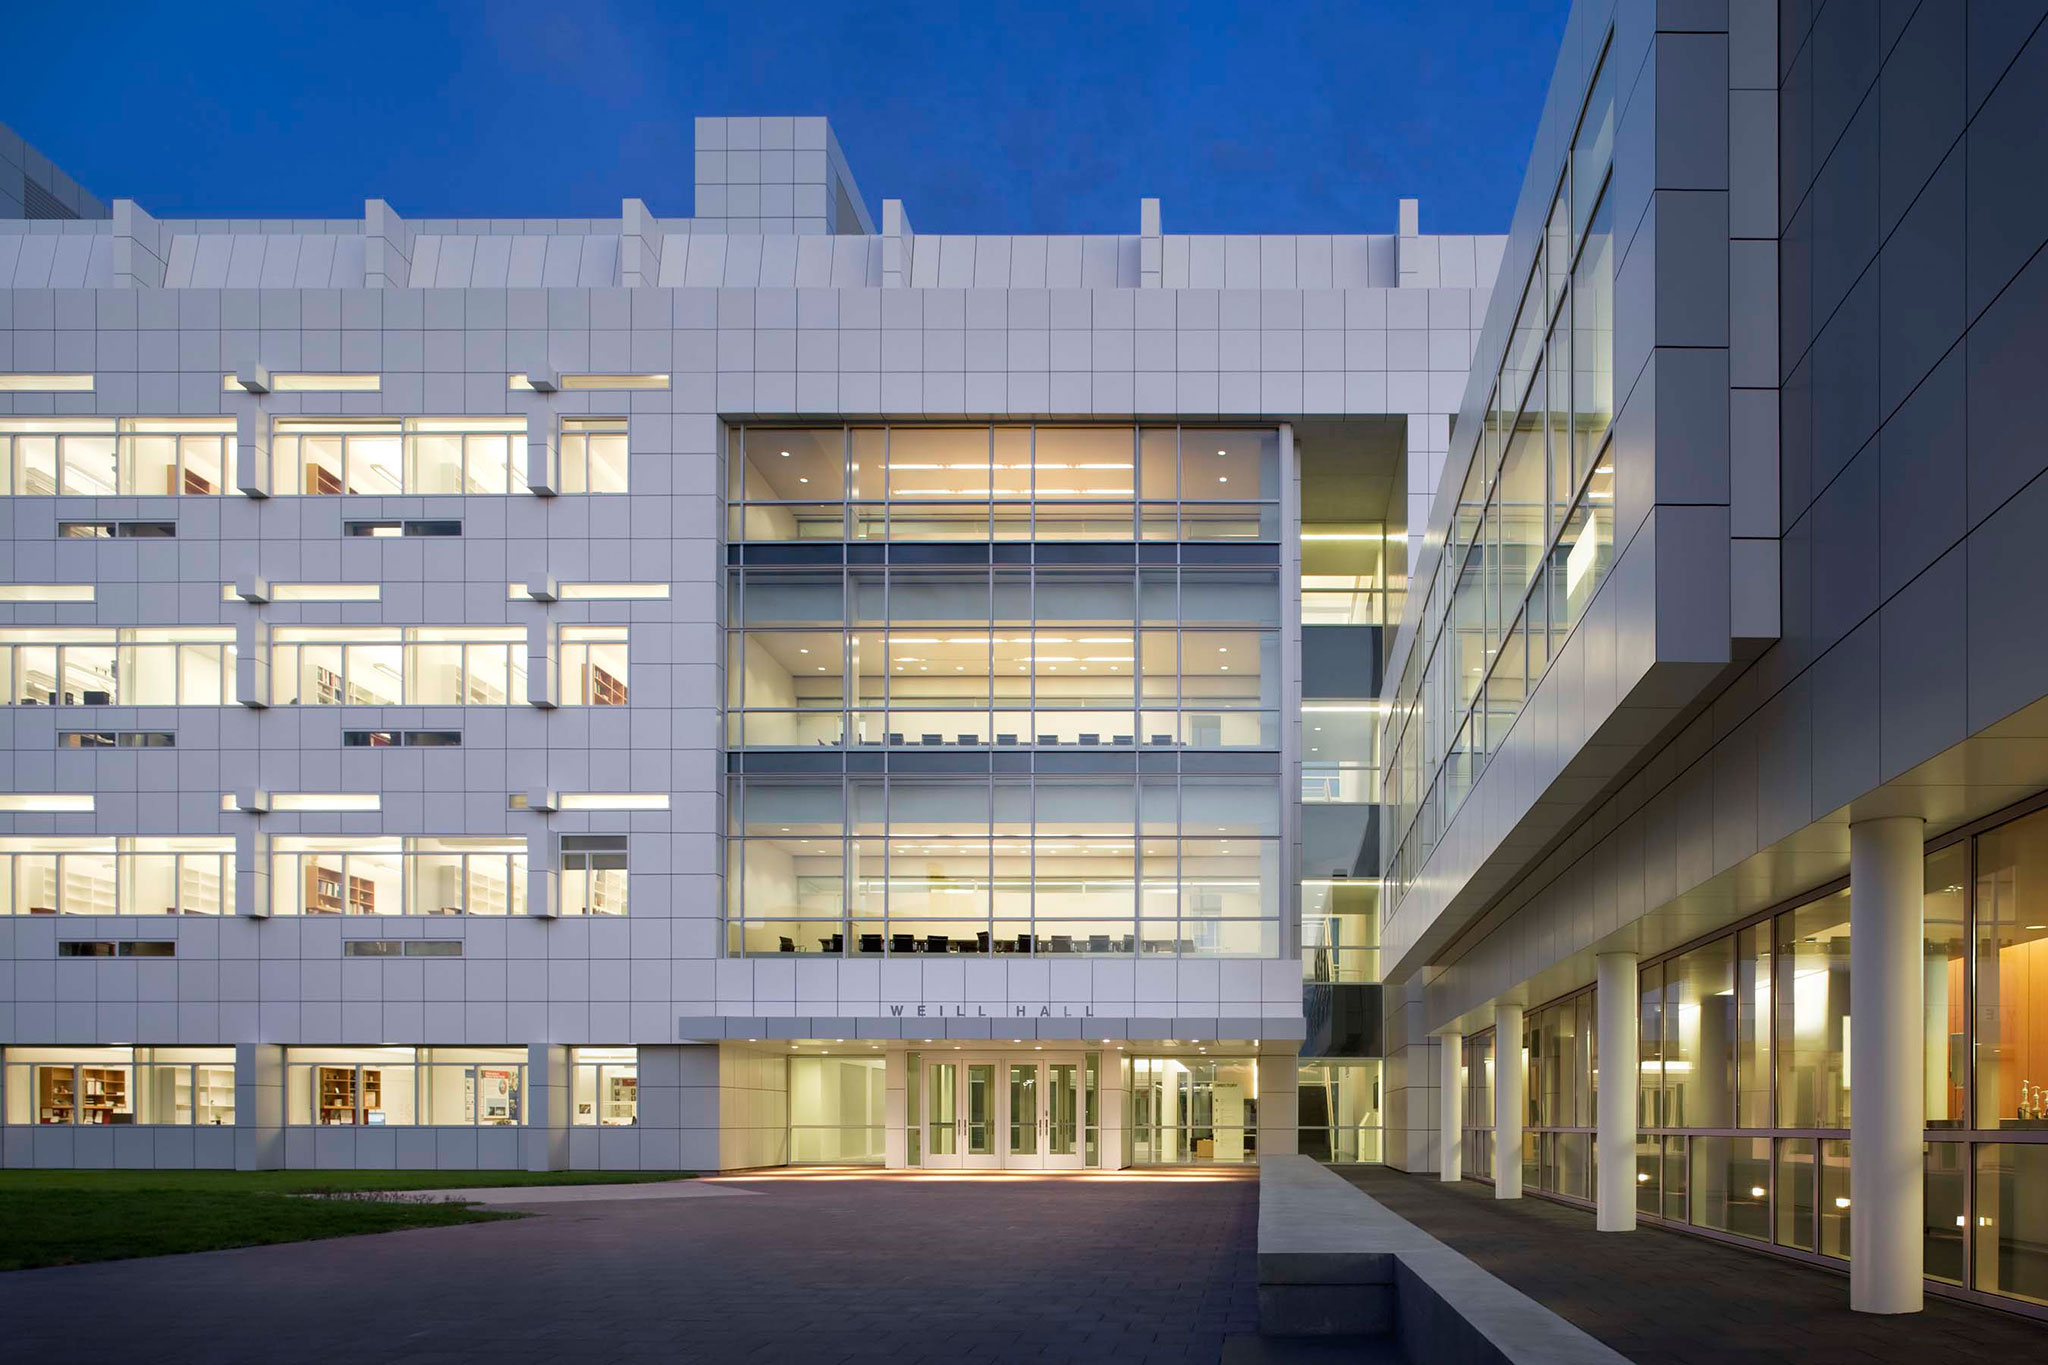 Richard Meier names the Chair of the Department of Architecture at